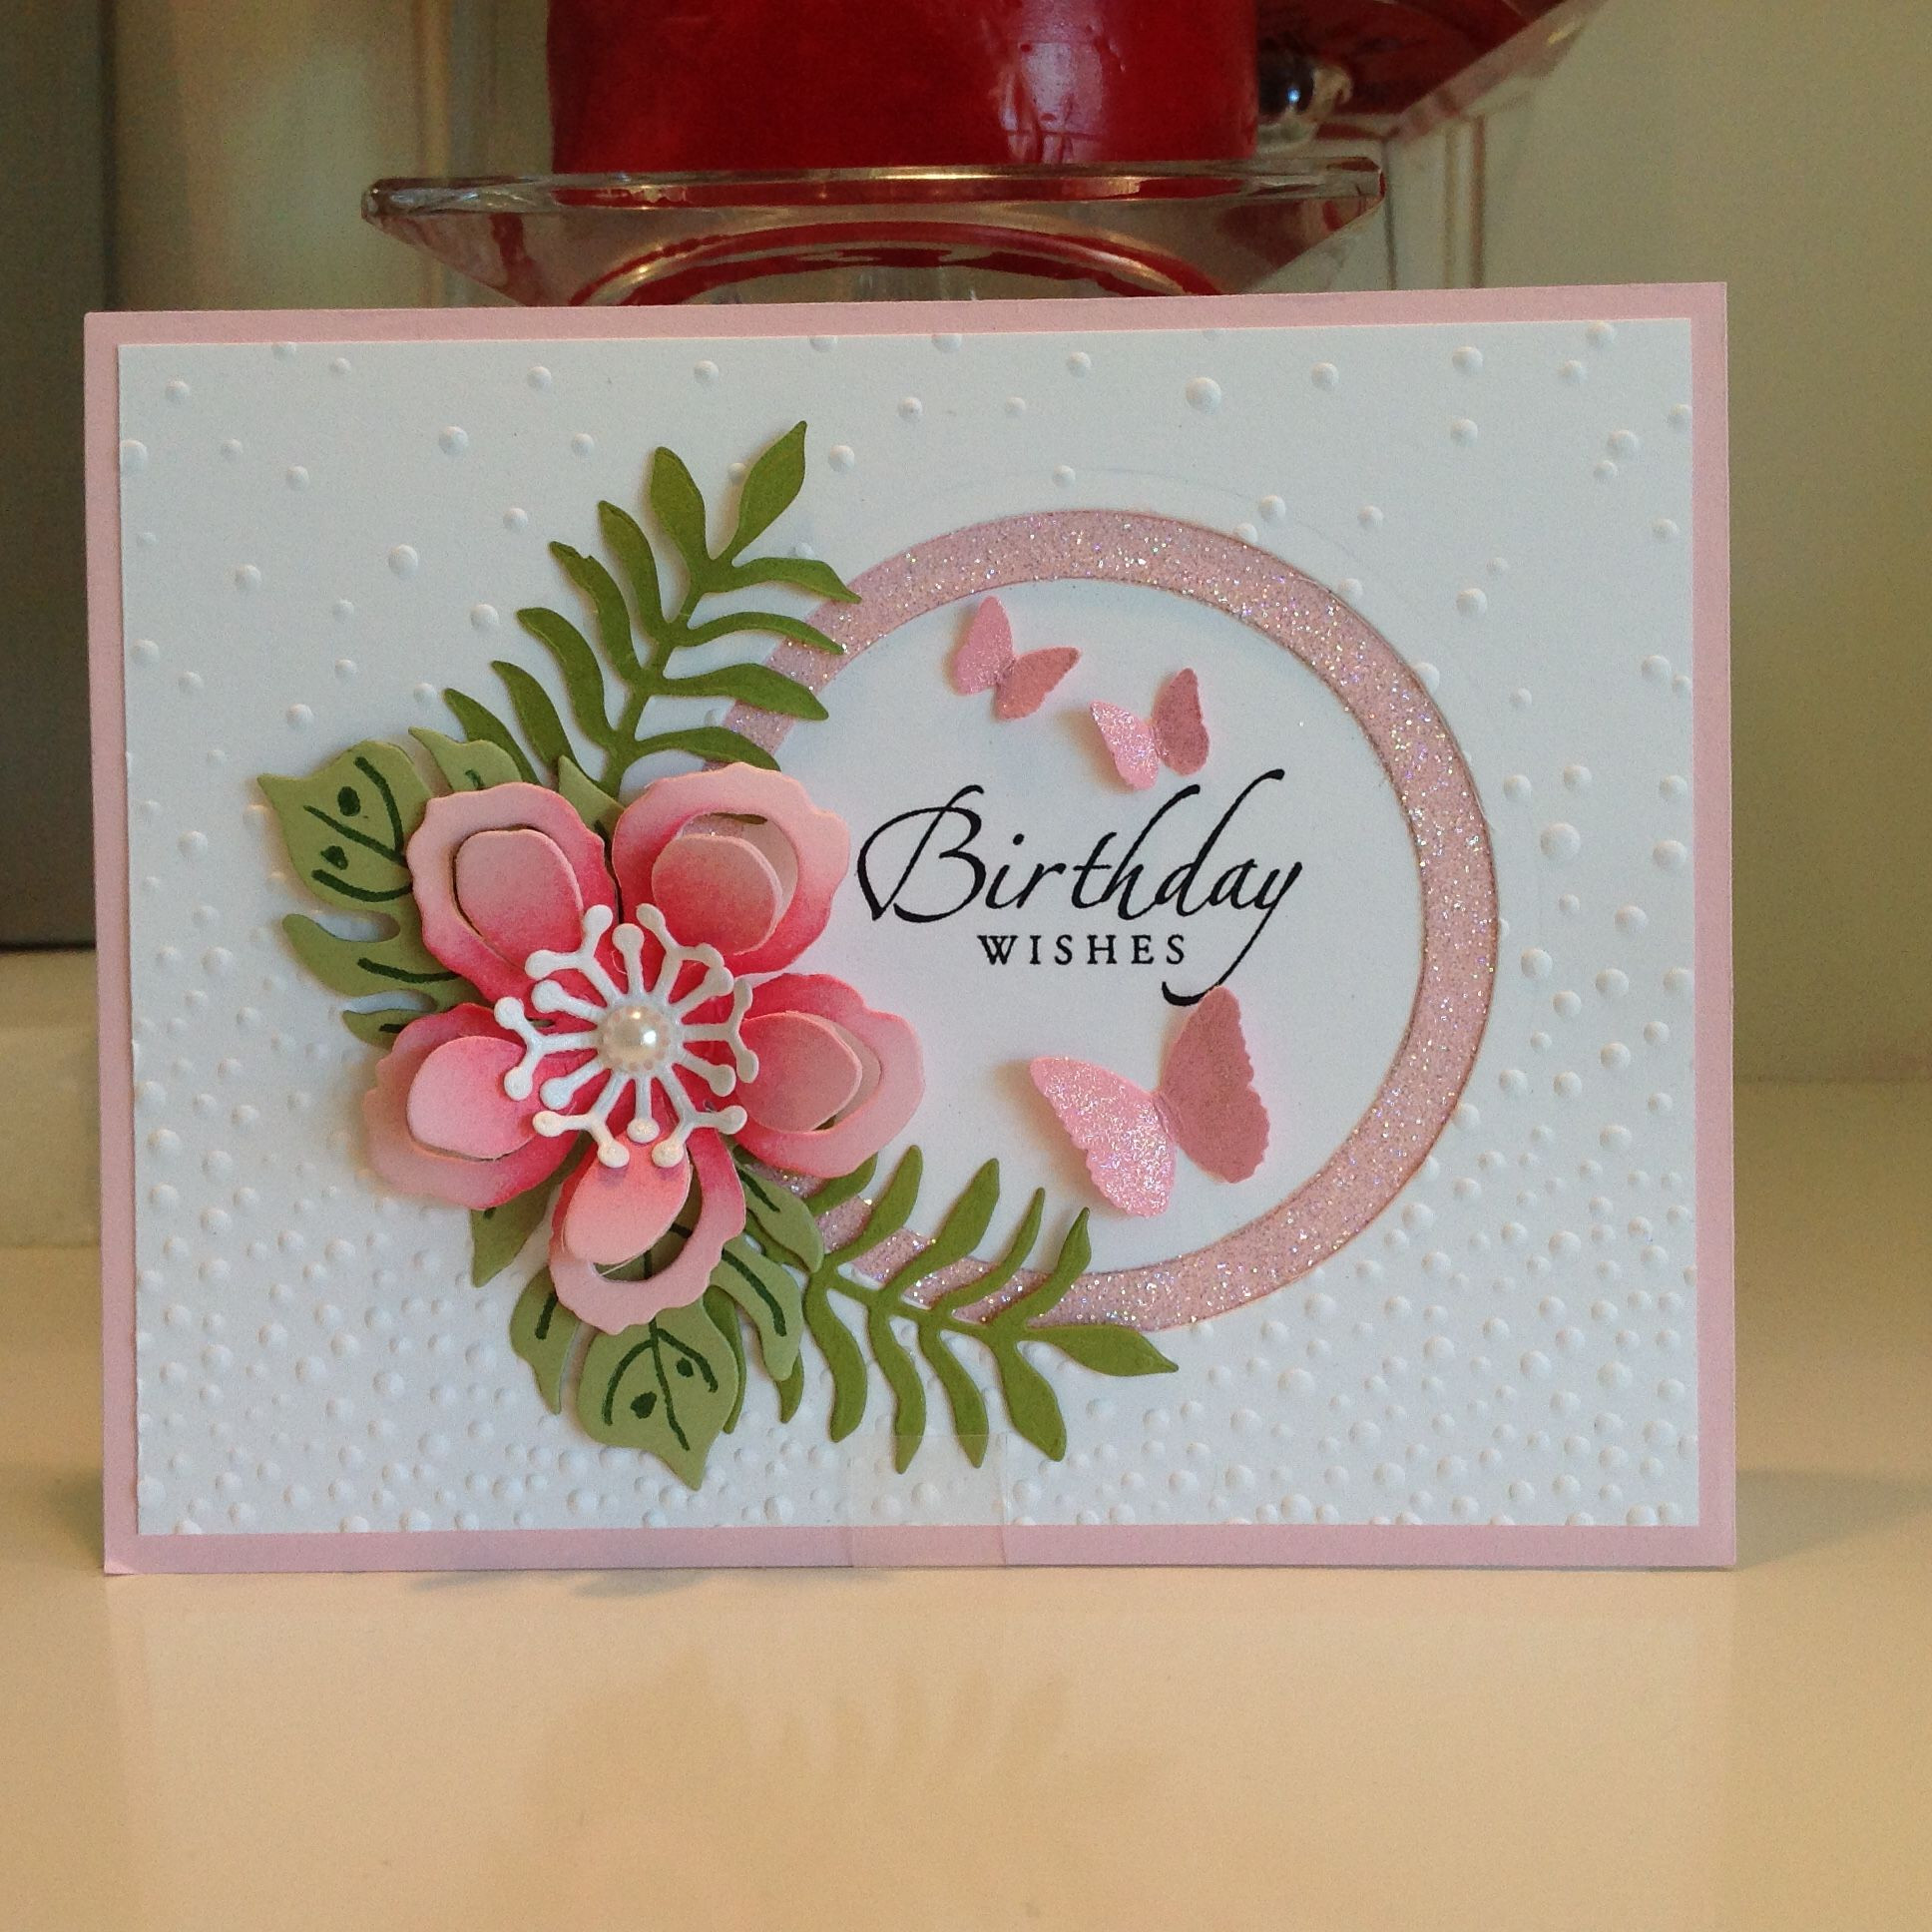 Pinterest Birthday Cards
 Happy Birthday card using Stampin Up Botanical Blooms